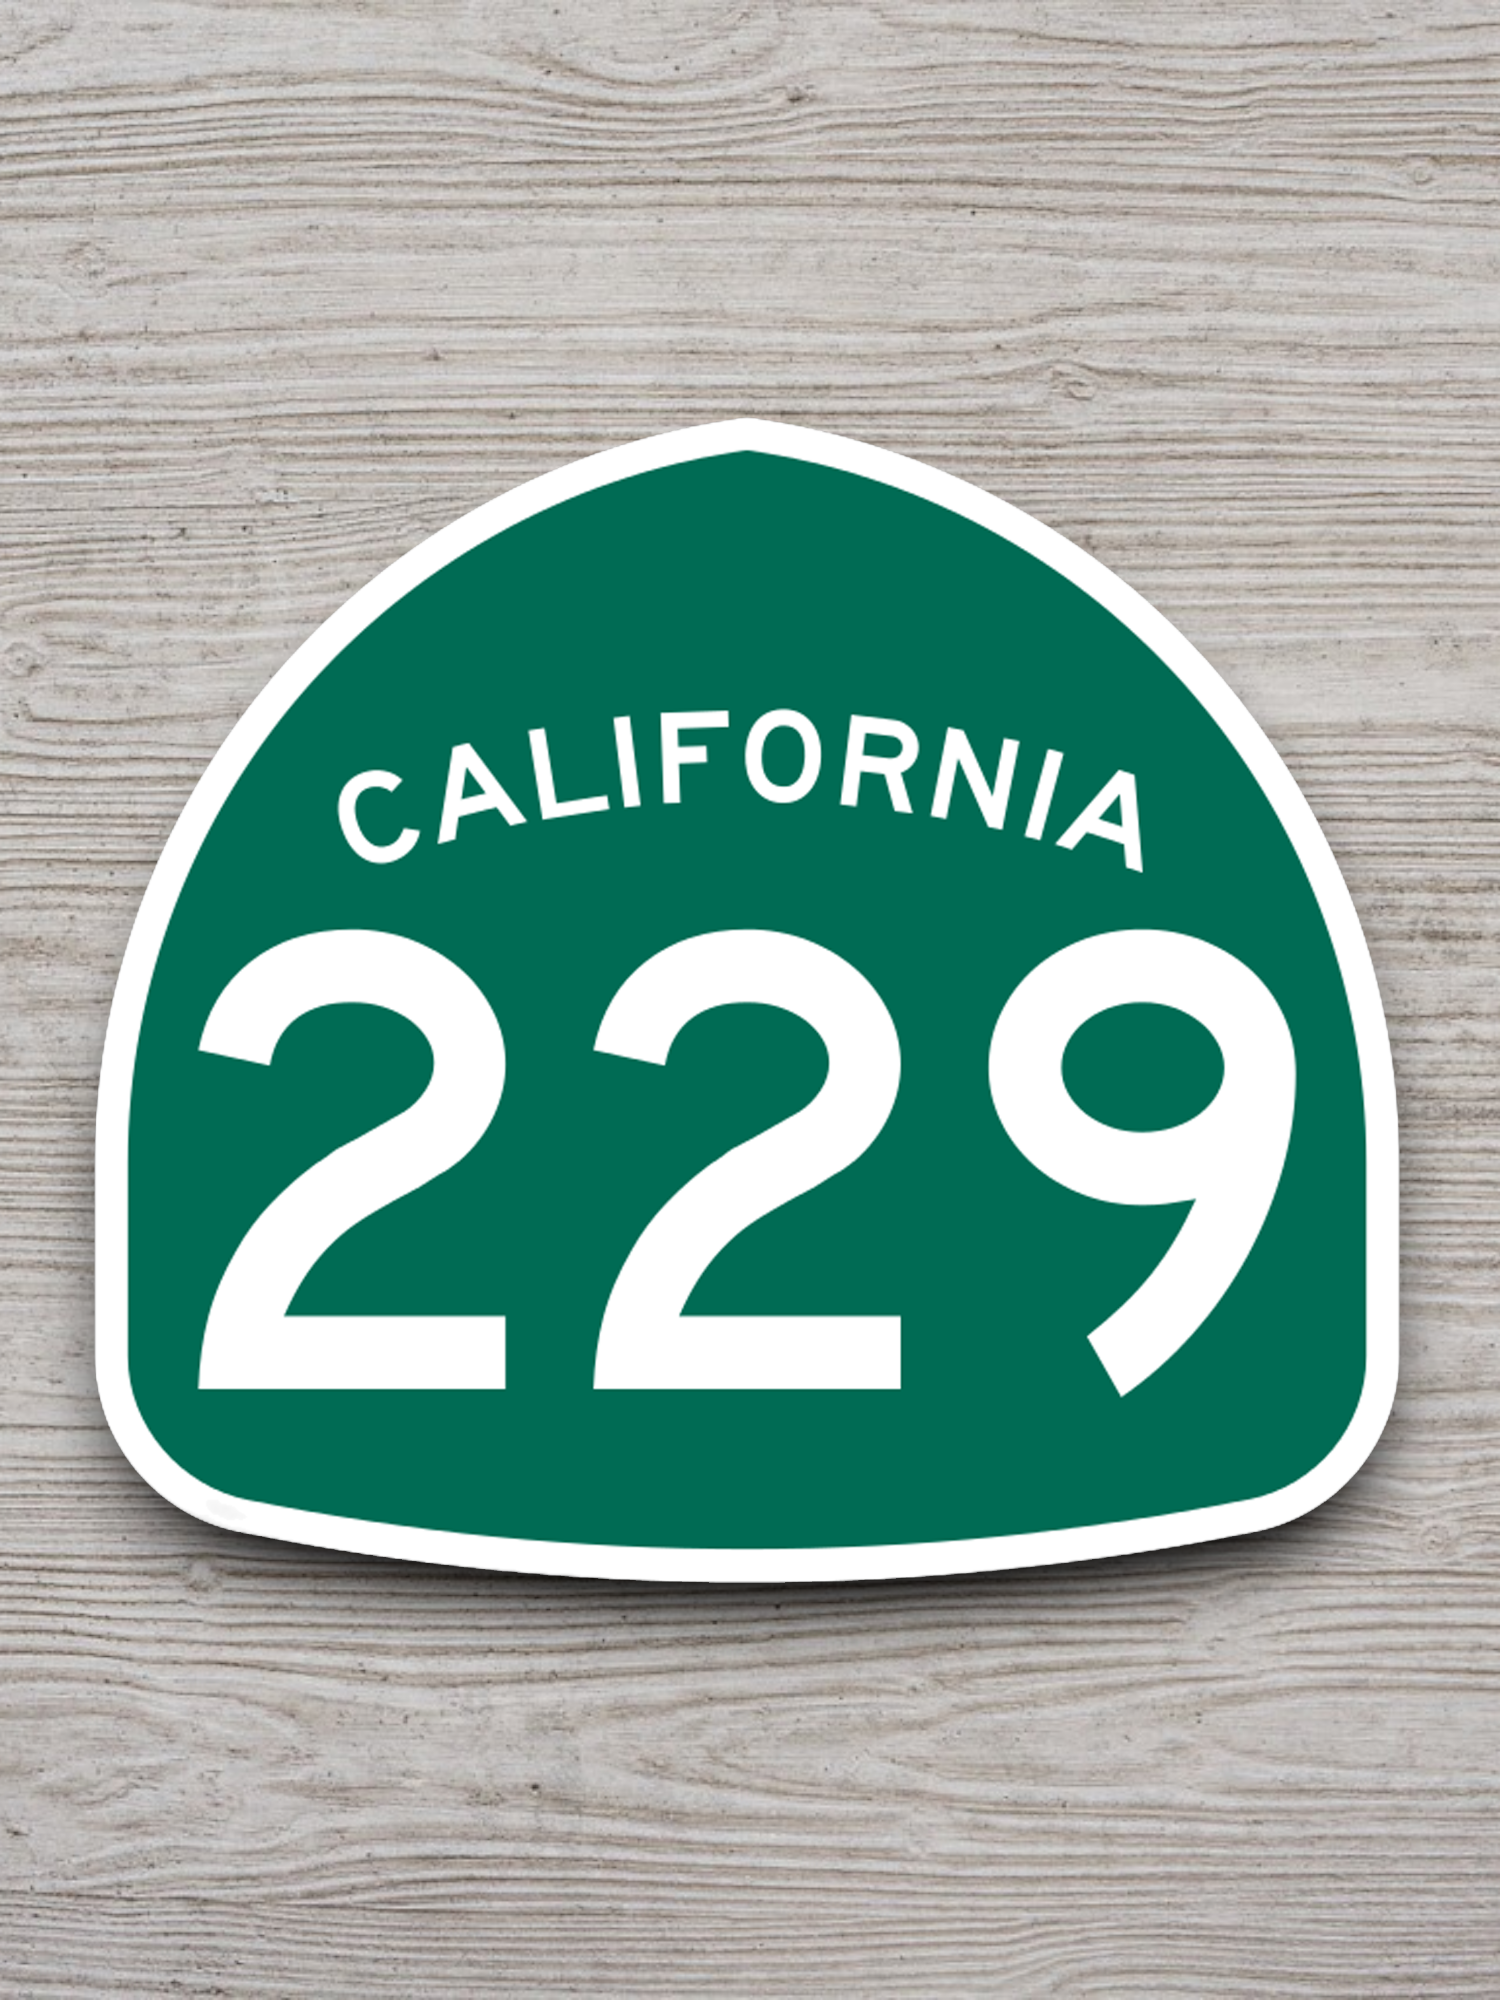 California State Route 229 Road Sign Sticker